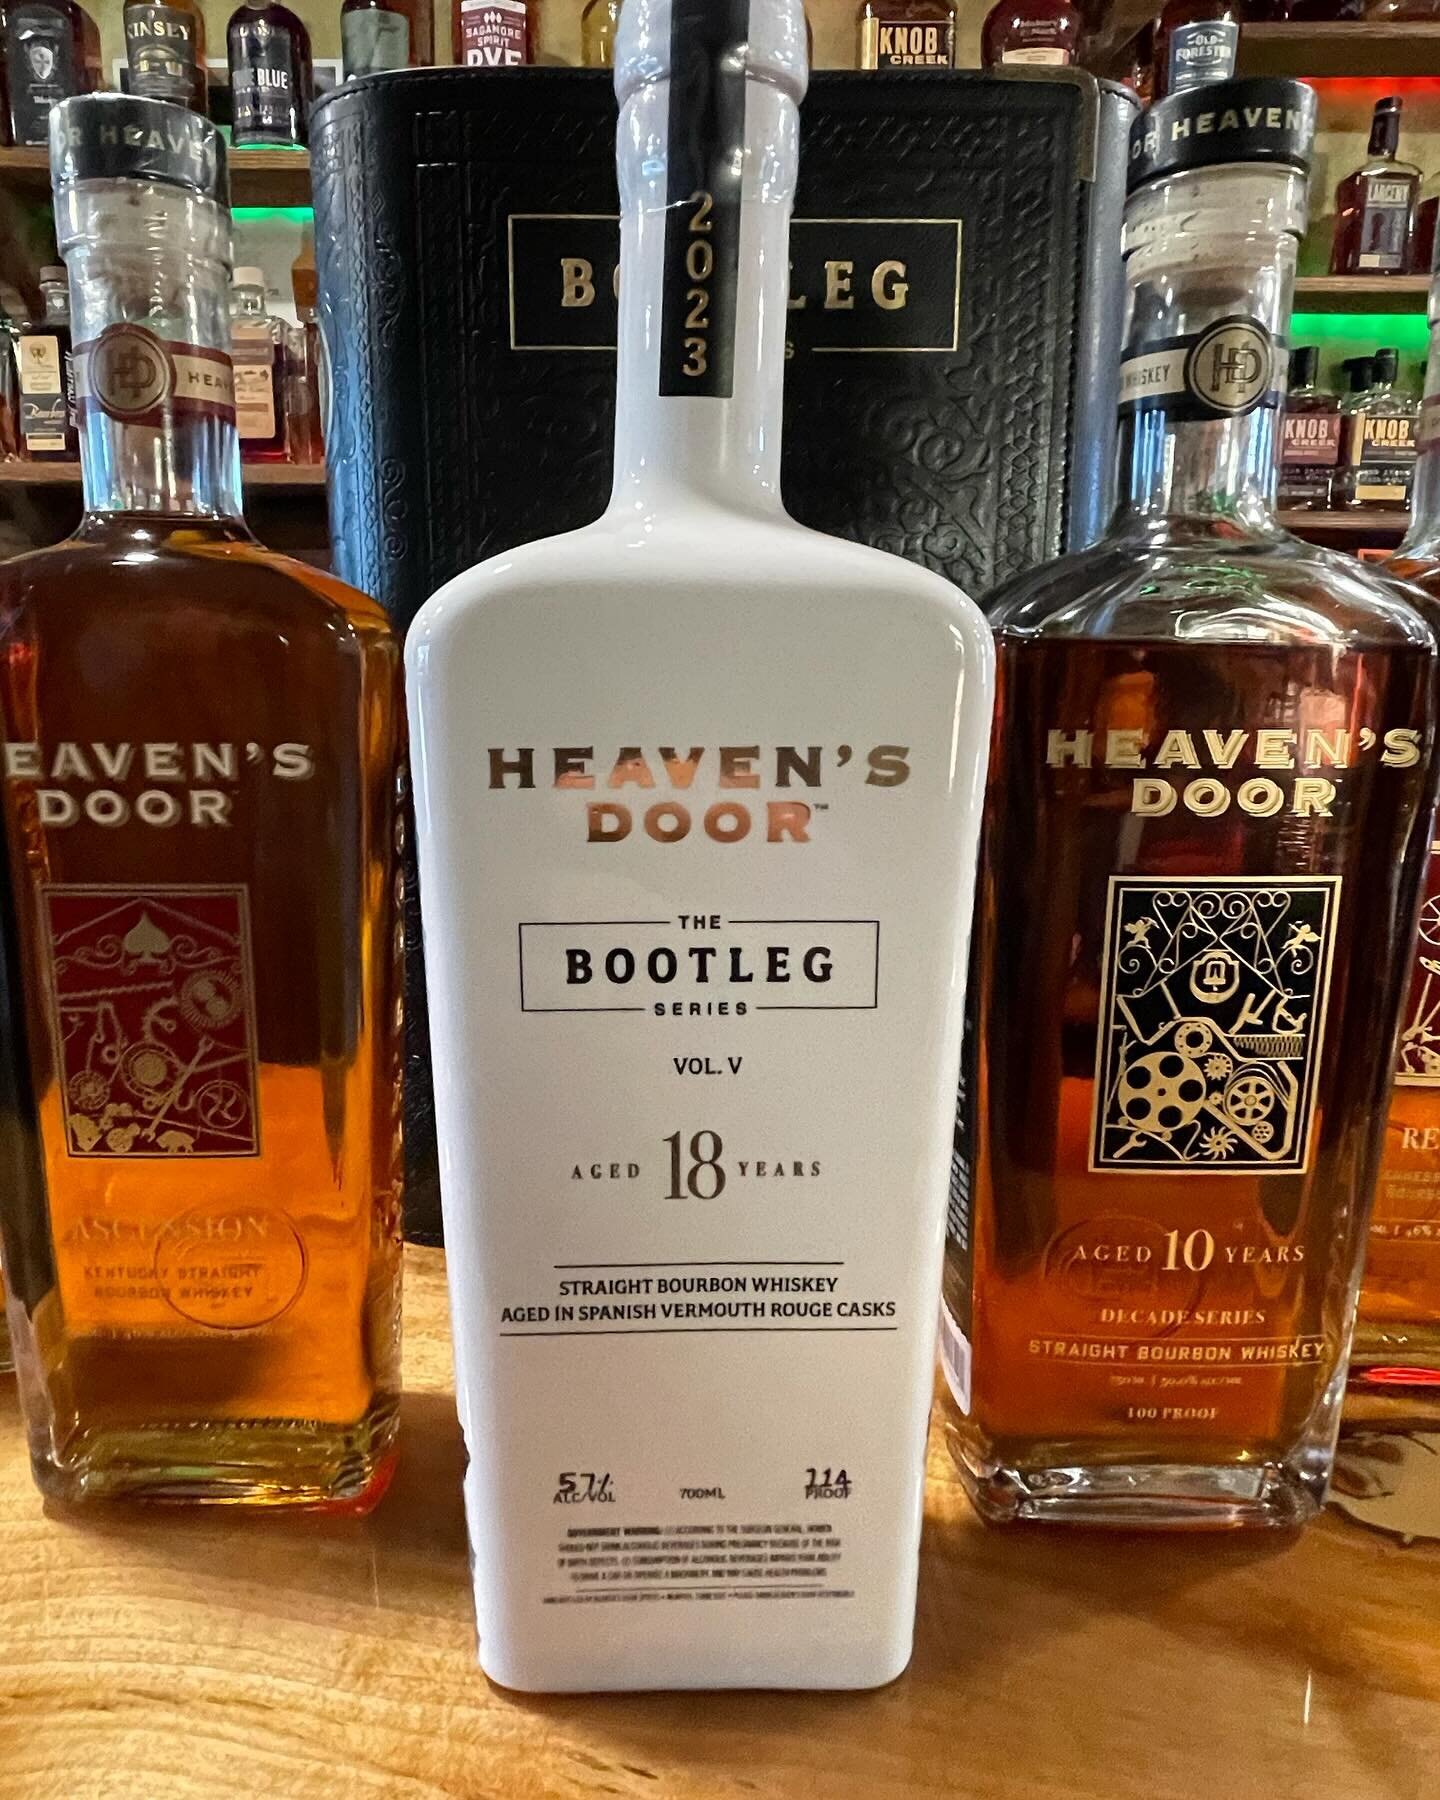 Our Next tasting has been posted! To attend events you will need a ticket per person. This event will be a tasting of 4 different Heaven&rsquo;s Door whiskeys with one being the very rare Bootleg Edition ($600 bottle)! 

Each ticket will include:

A 